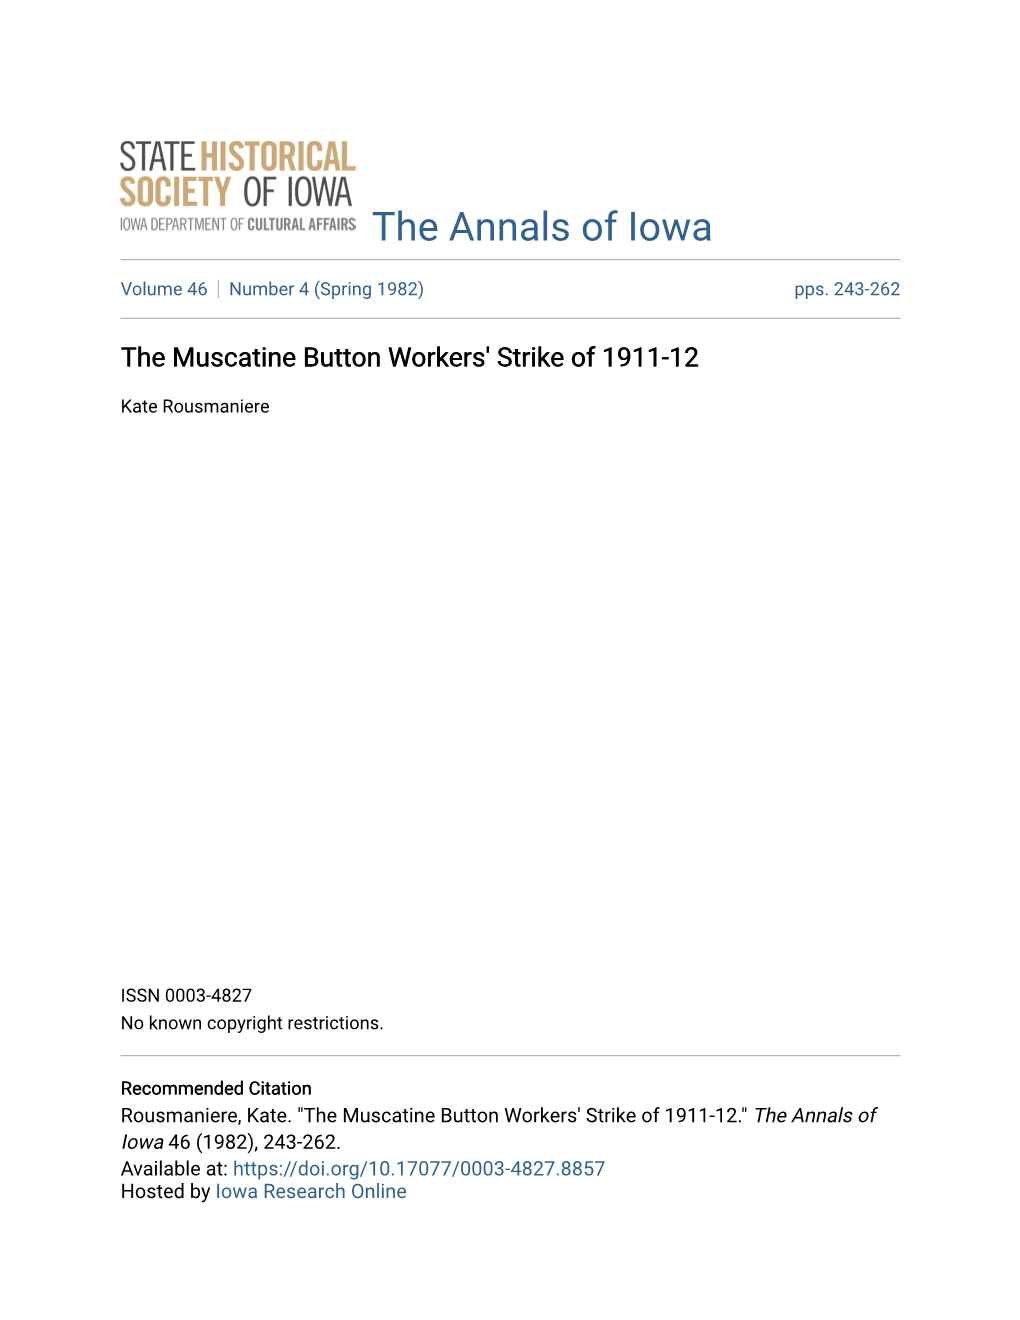 The Muscatine Button Workers' Strike of 1911-12